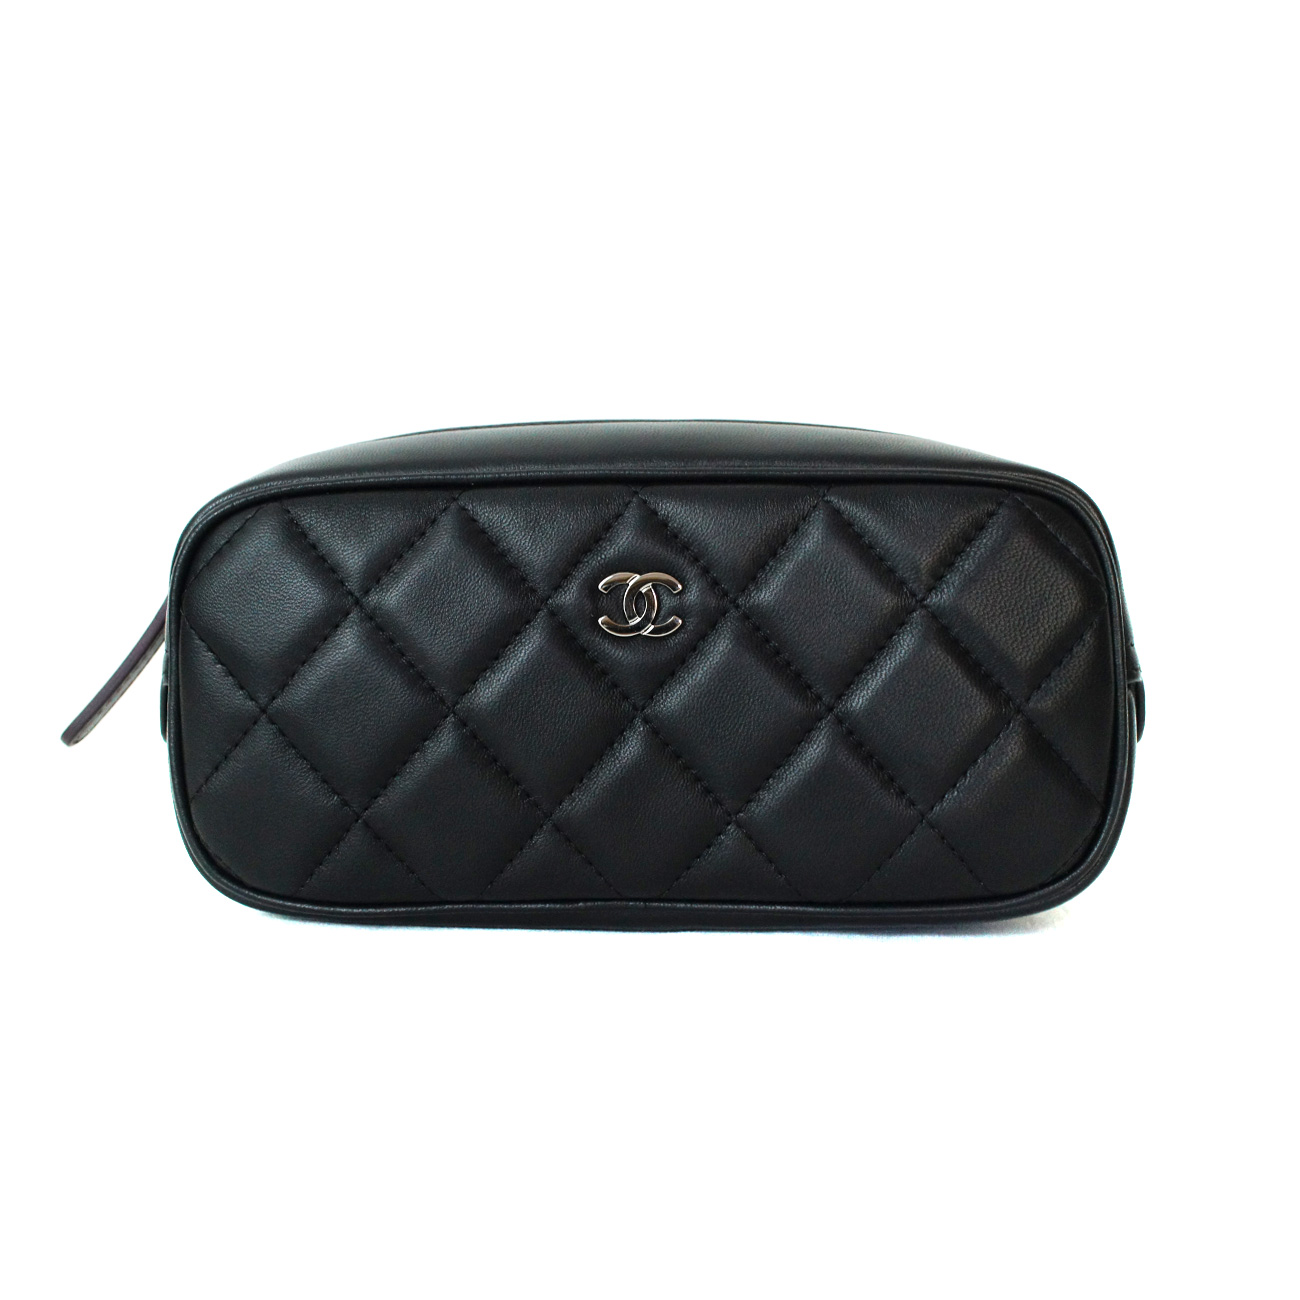 CHANEL Cosmetic Pouch Quilted Black Lambskin Leather Silver CC, New, 100%  authentic guaranteed.